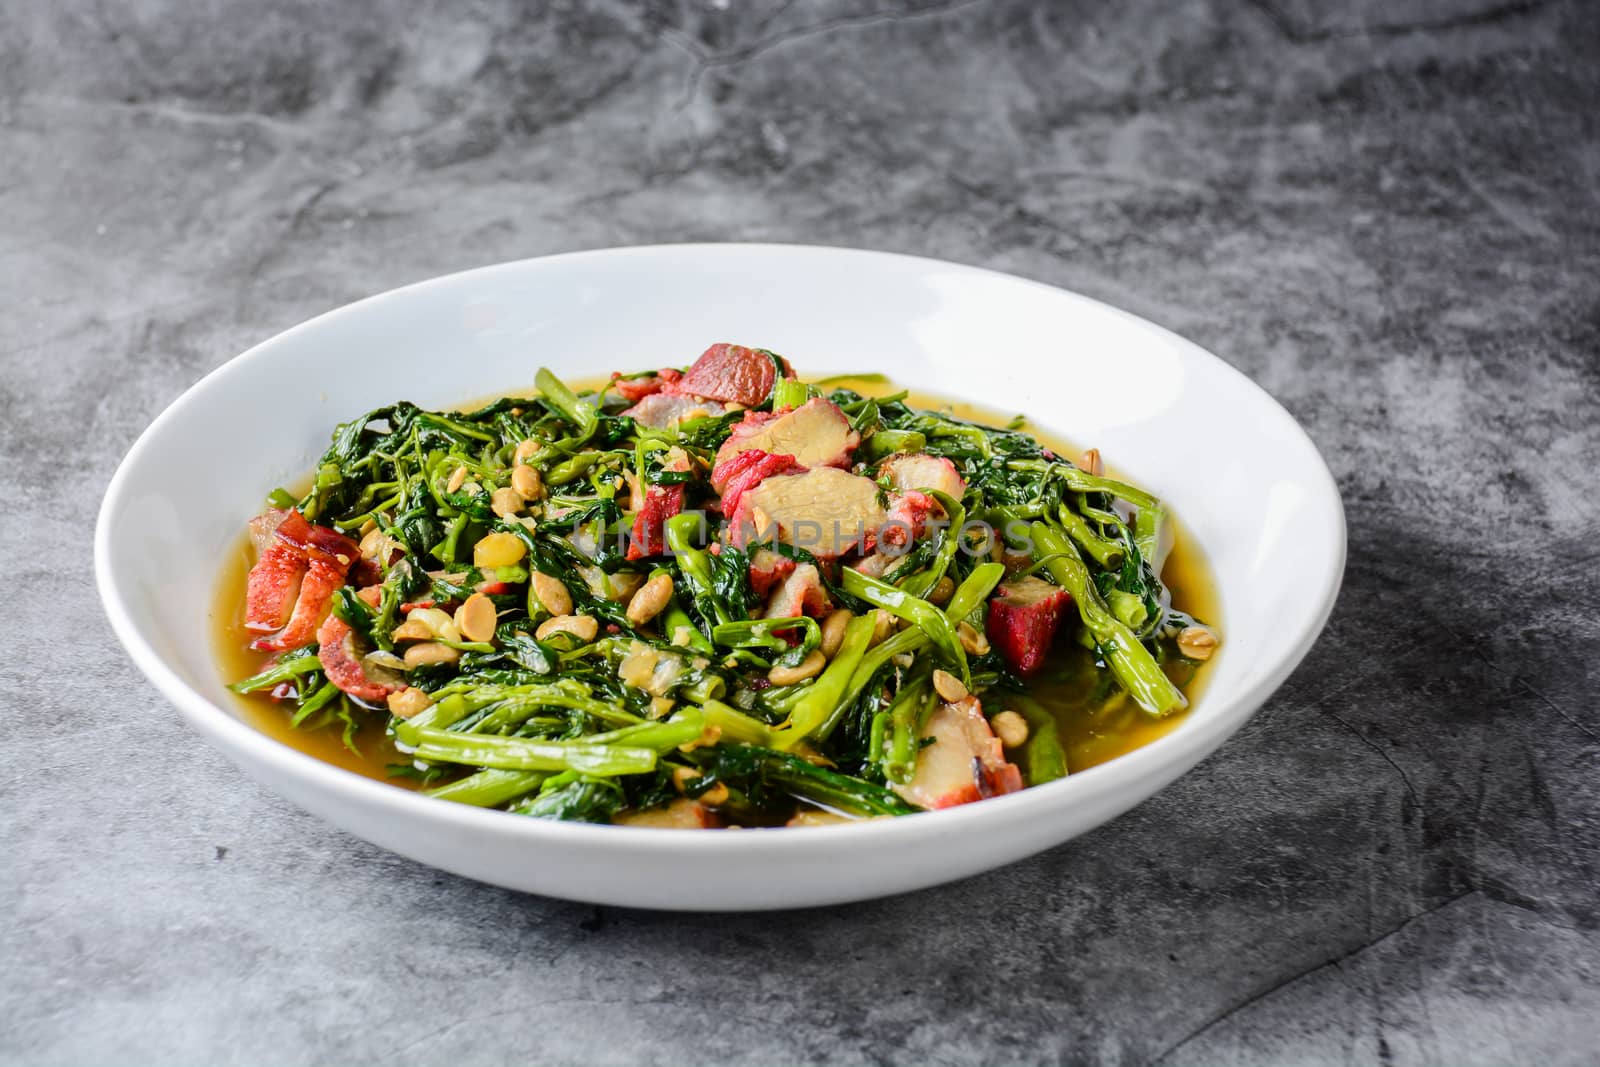 Fried water spinach with barbecued red pork
